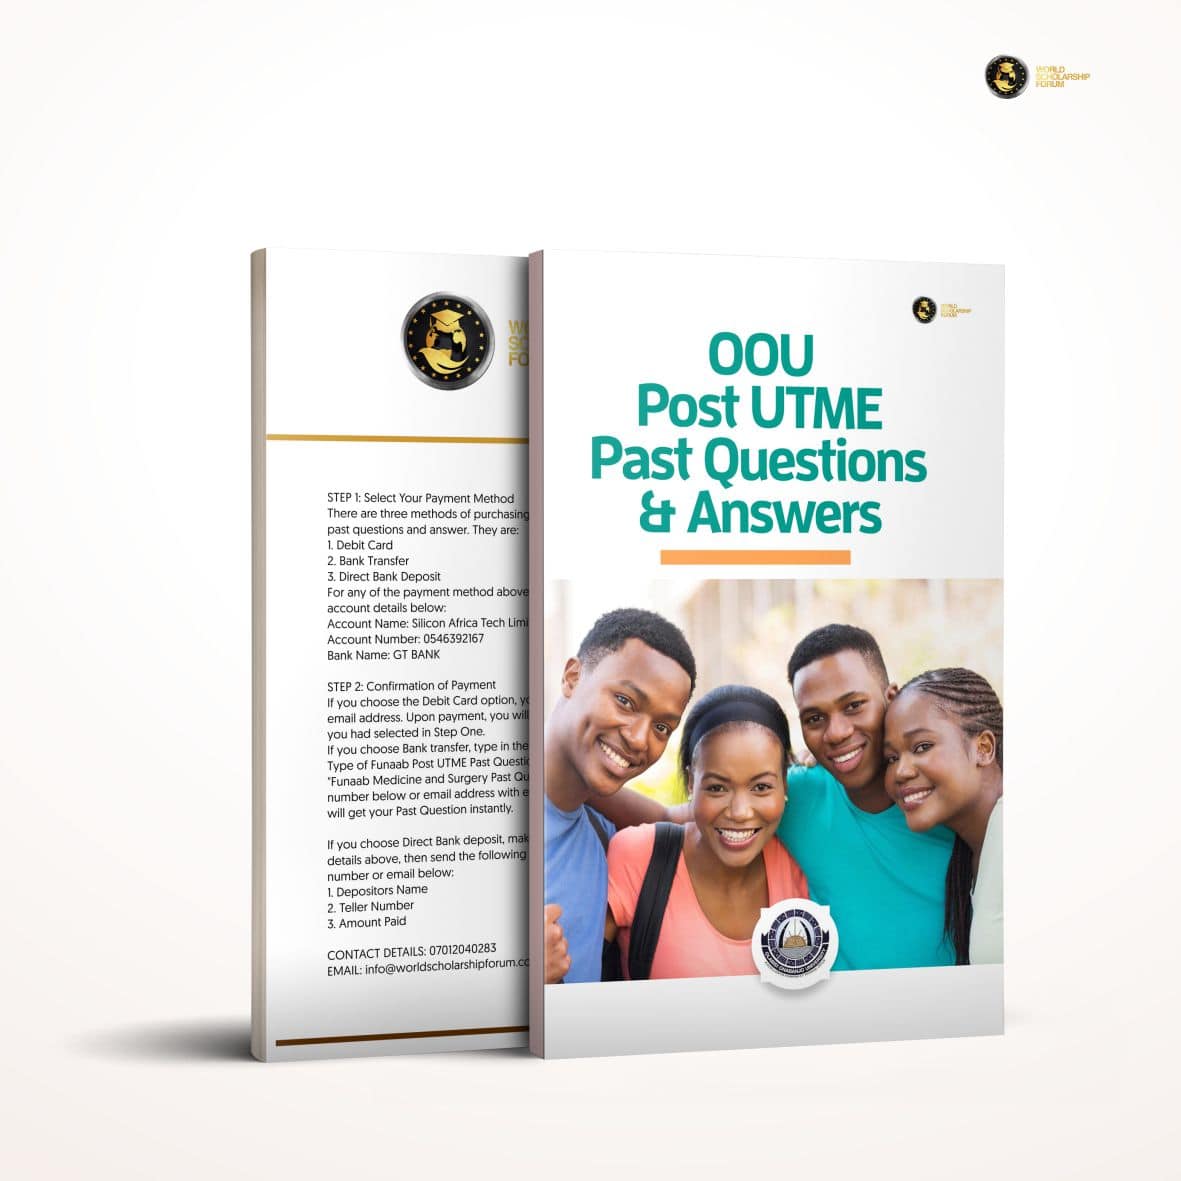 oou-post-utme-past-question-answers